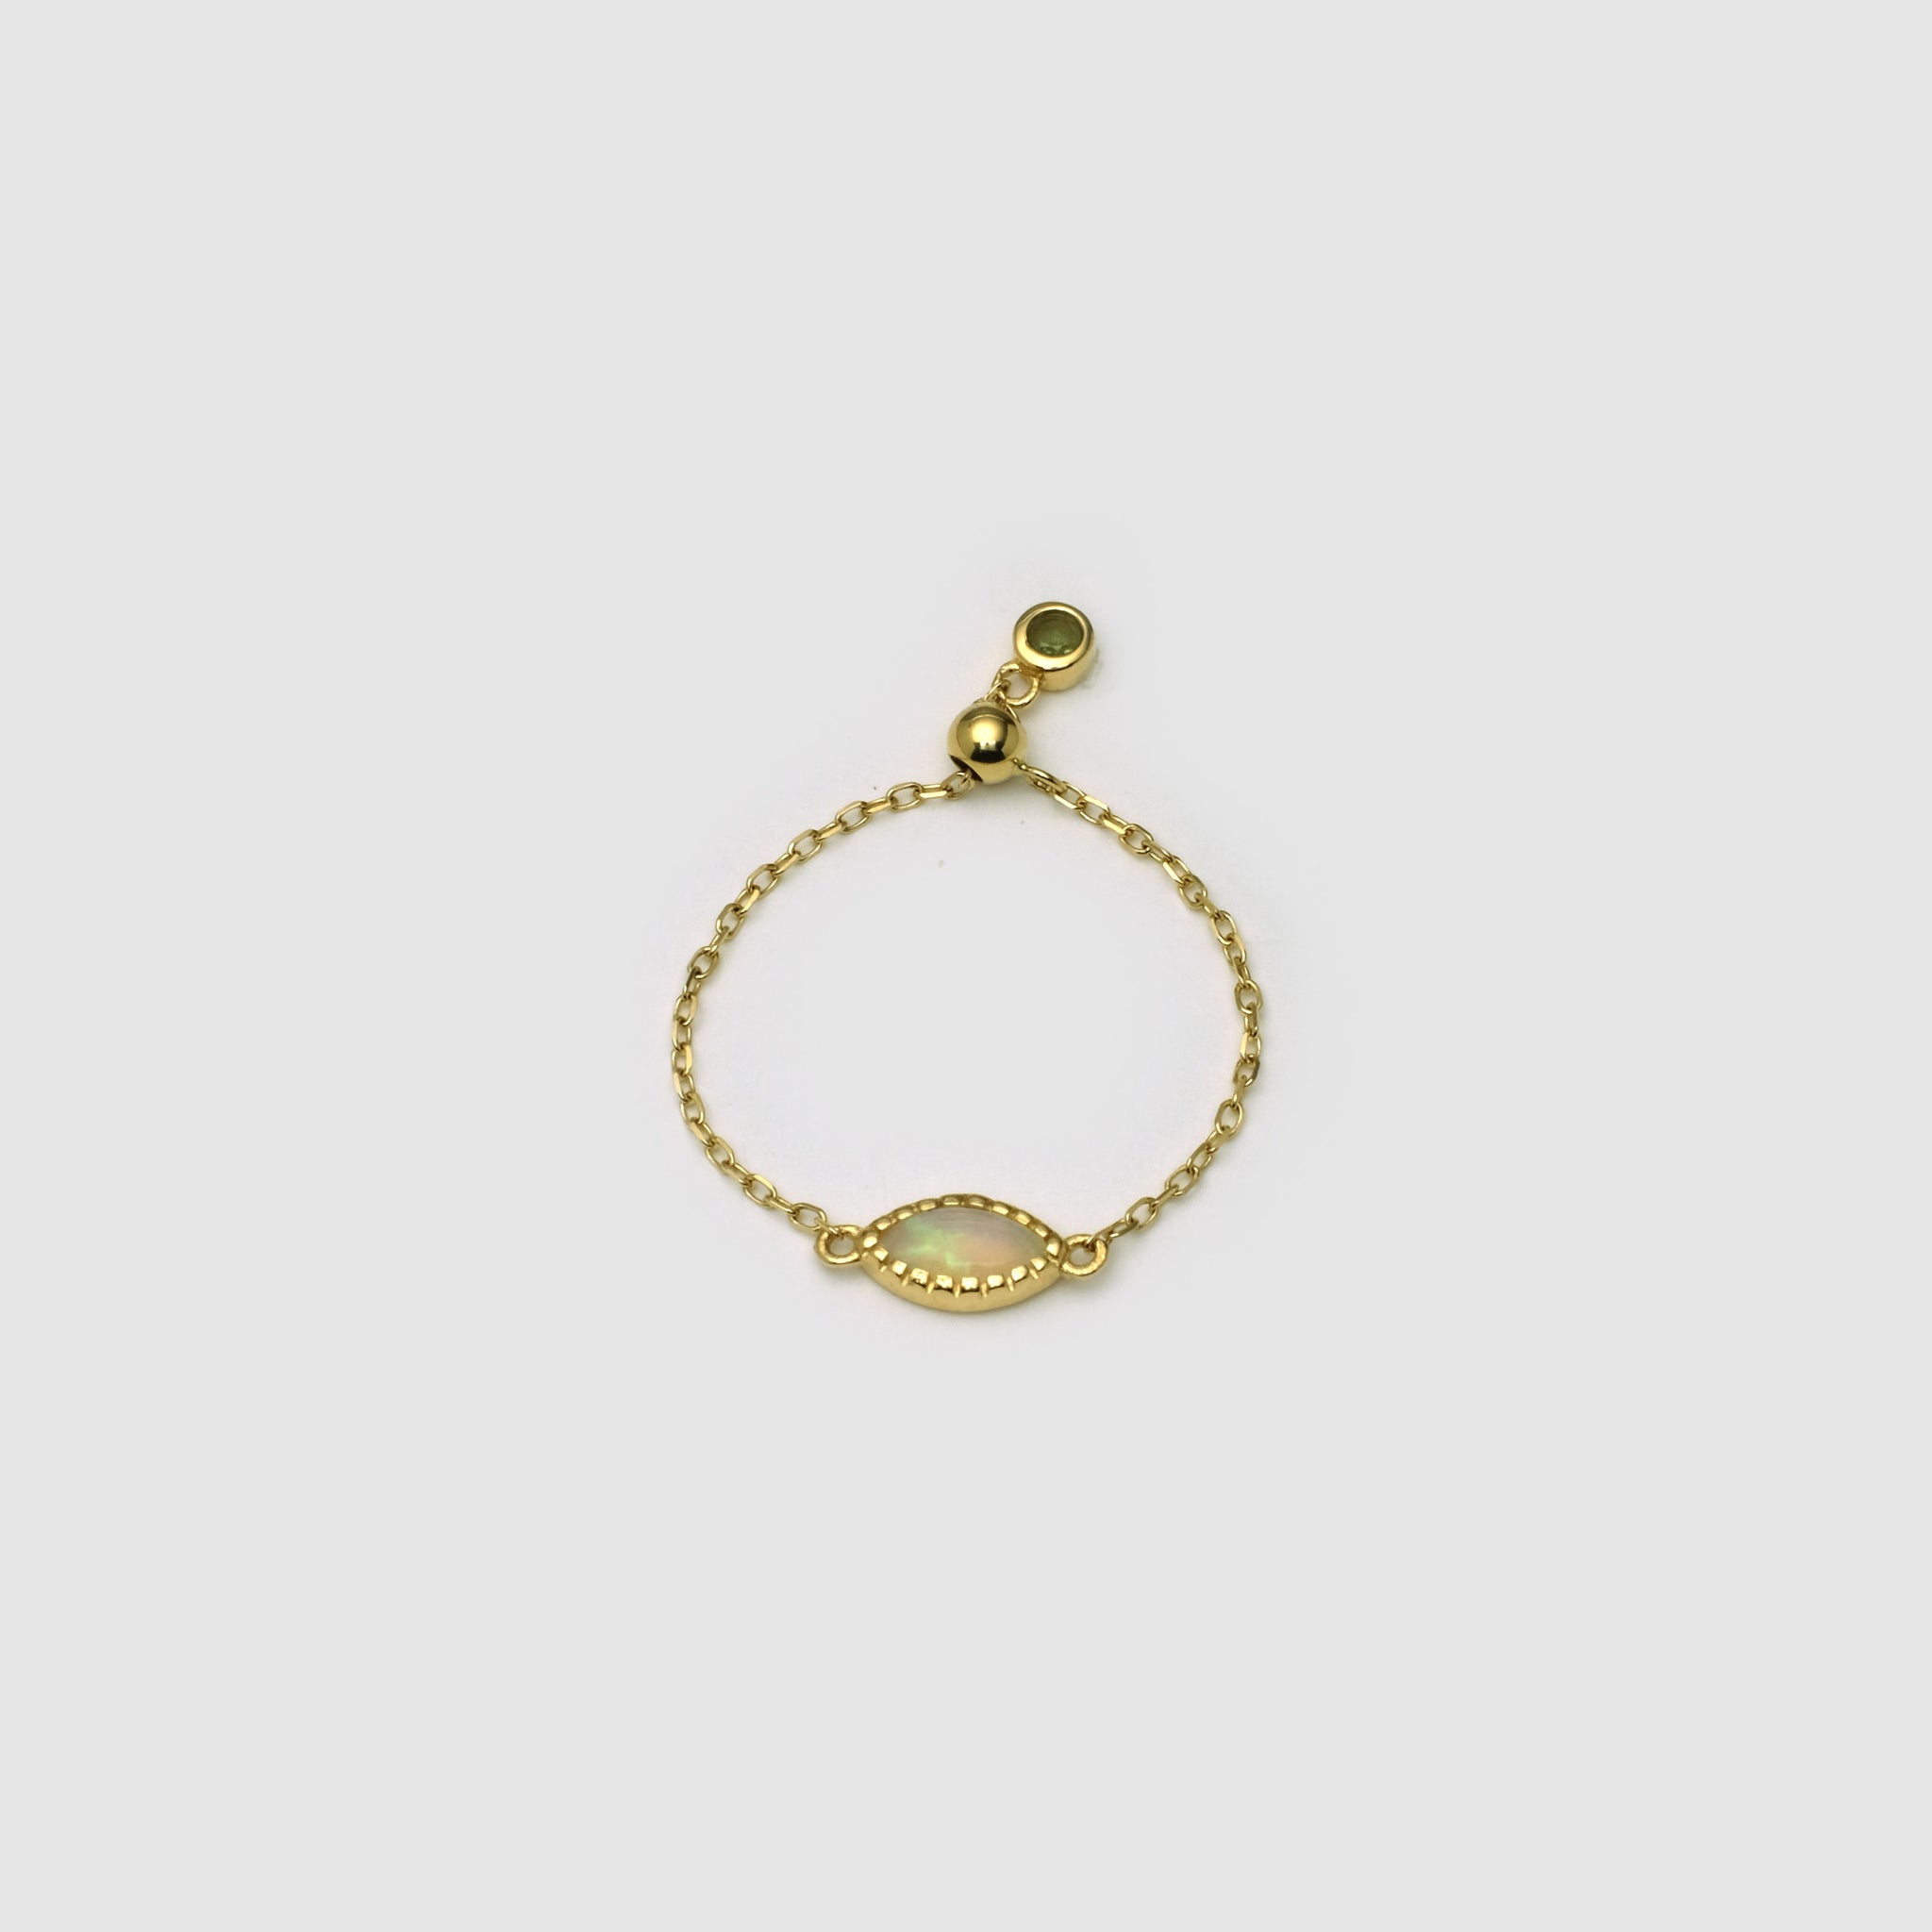 Marquise Opal Chain Ring, Size Adjustable, 18k solid gold